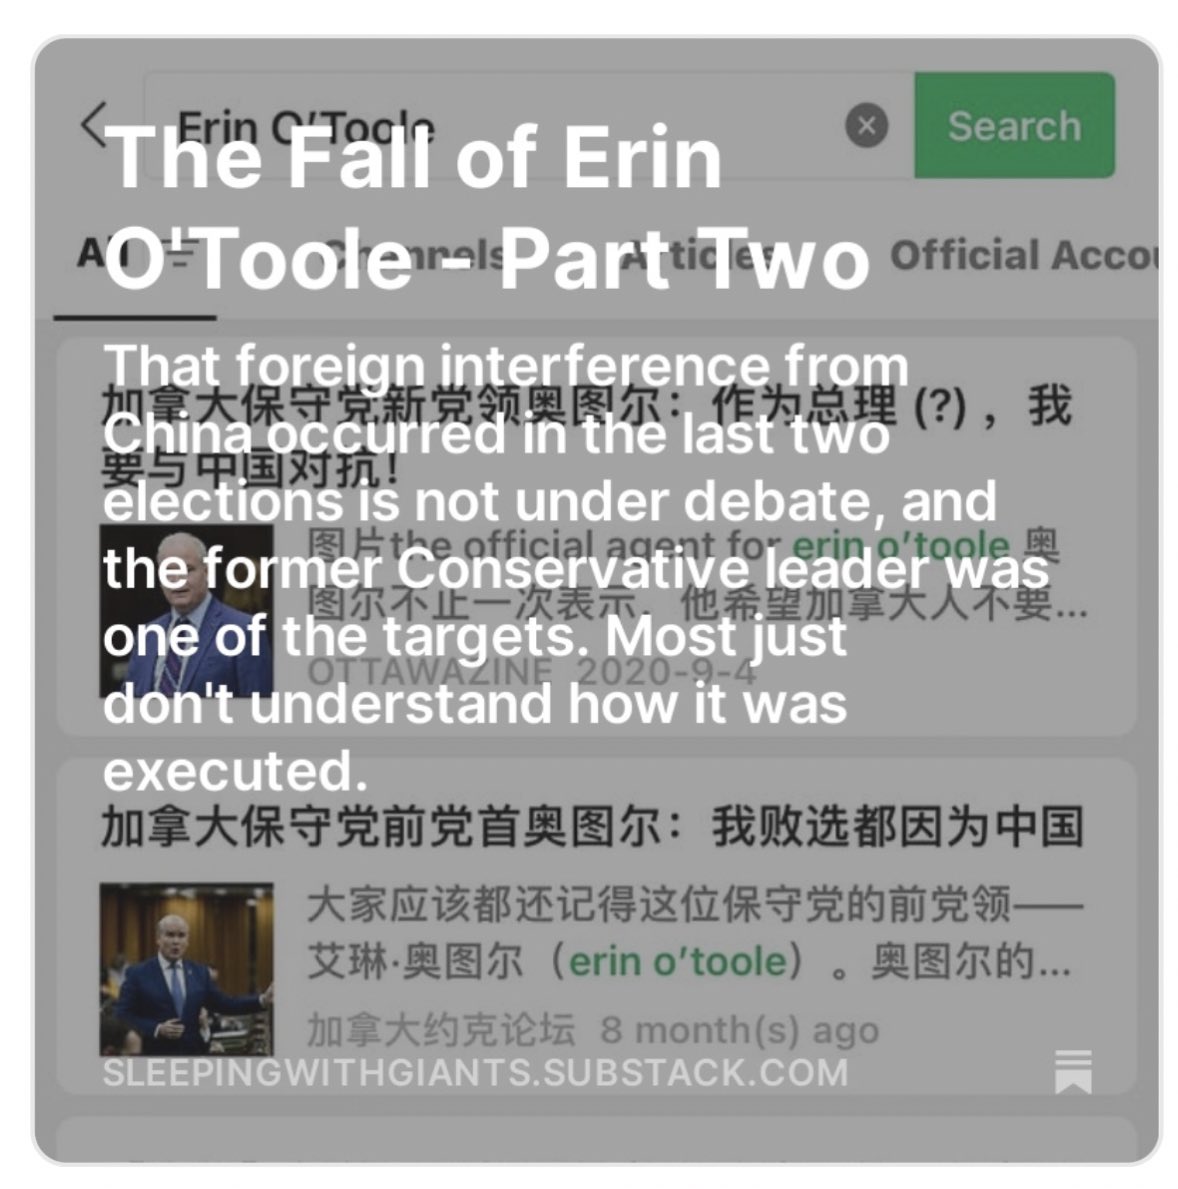 The Fall of Erin O’Toole - Part Two. If GAC could recently identify a PRC-sponsored hit campaign while monitoring a by-election, it begs the question as to why the RRM was not activated ahead of the 2021 federal election when it is evident a similar smear job was underway.